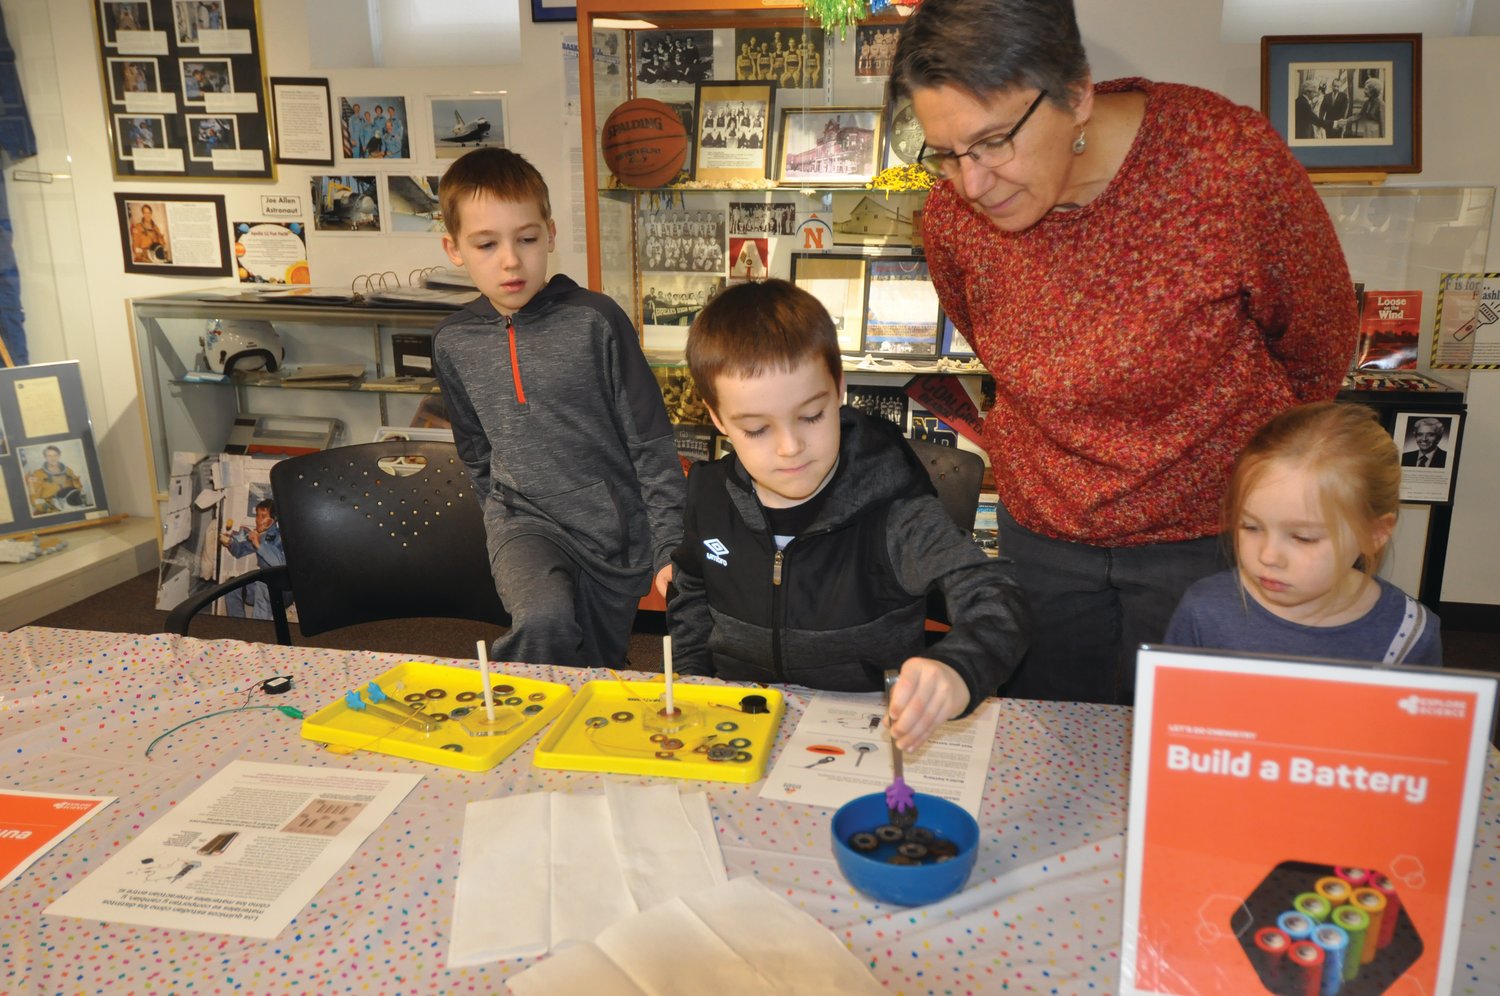 Levi Fowler, center left, builds a battery as Luka Fowler, Karen Thada and Mirium Fowler watch Friday at the Carnegie Museum of Montgomery County. The project was part of the winter break drop-in science activities, which continue Wednesday-Saturday through Jan. 4. The Carnegie will be closed on New Year's Eve and New Year's Day.